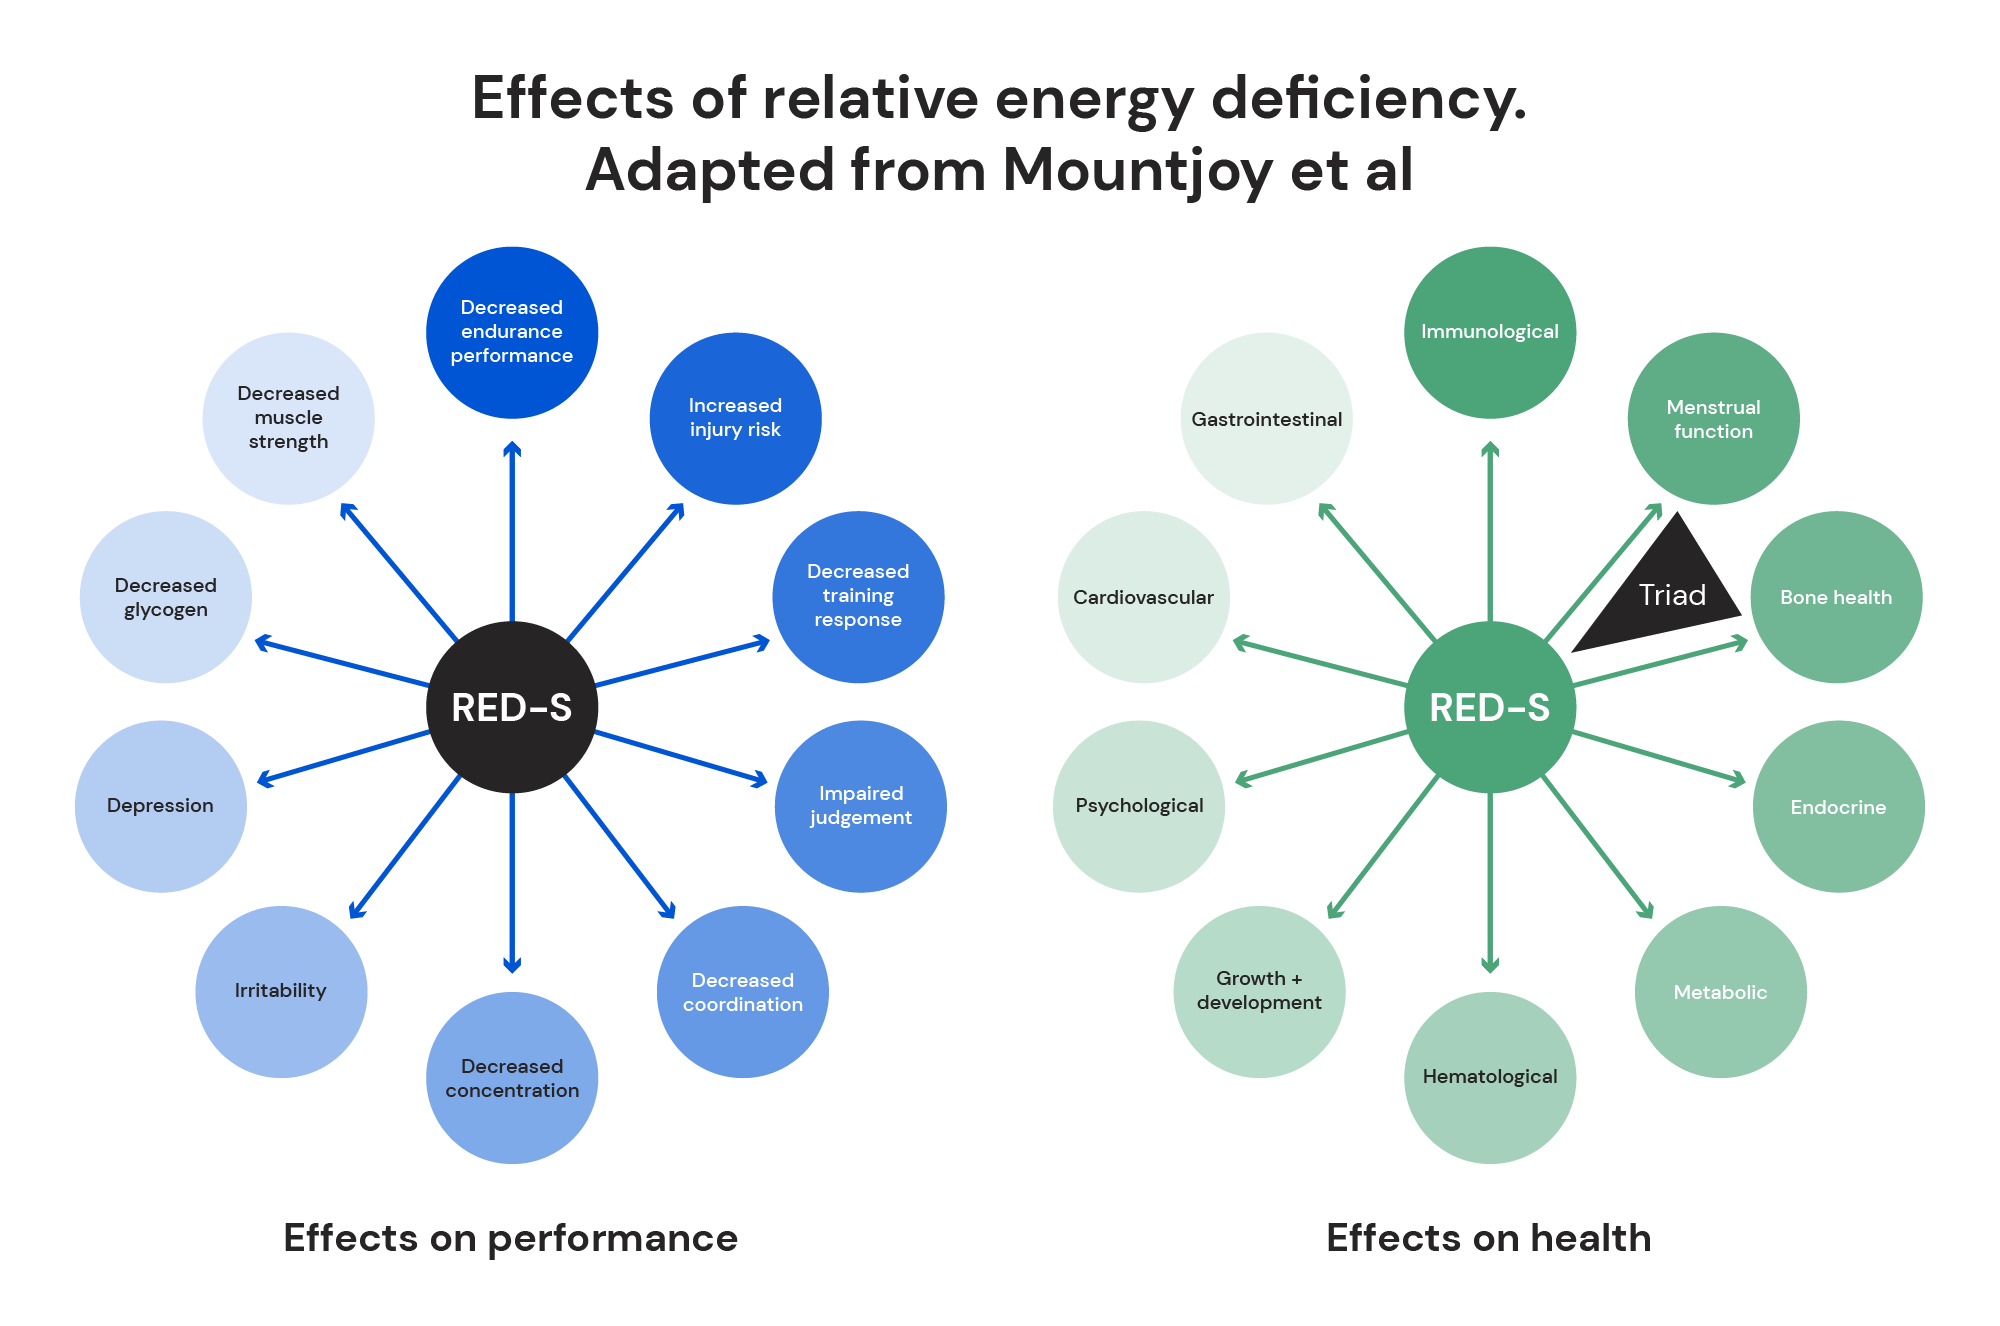 Effects of relative energy deficiency